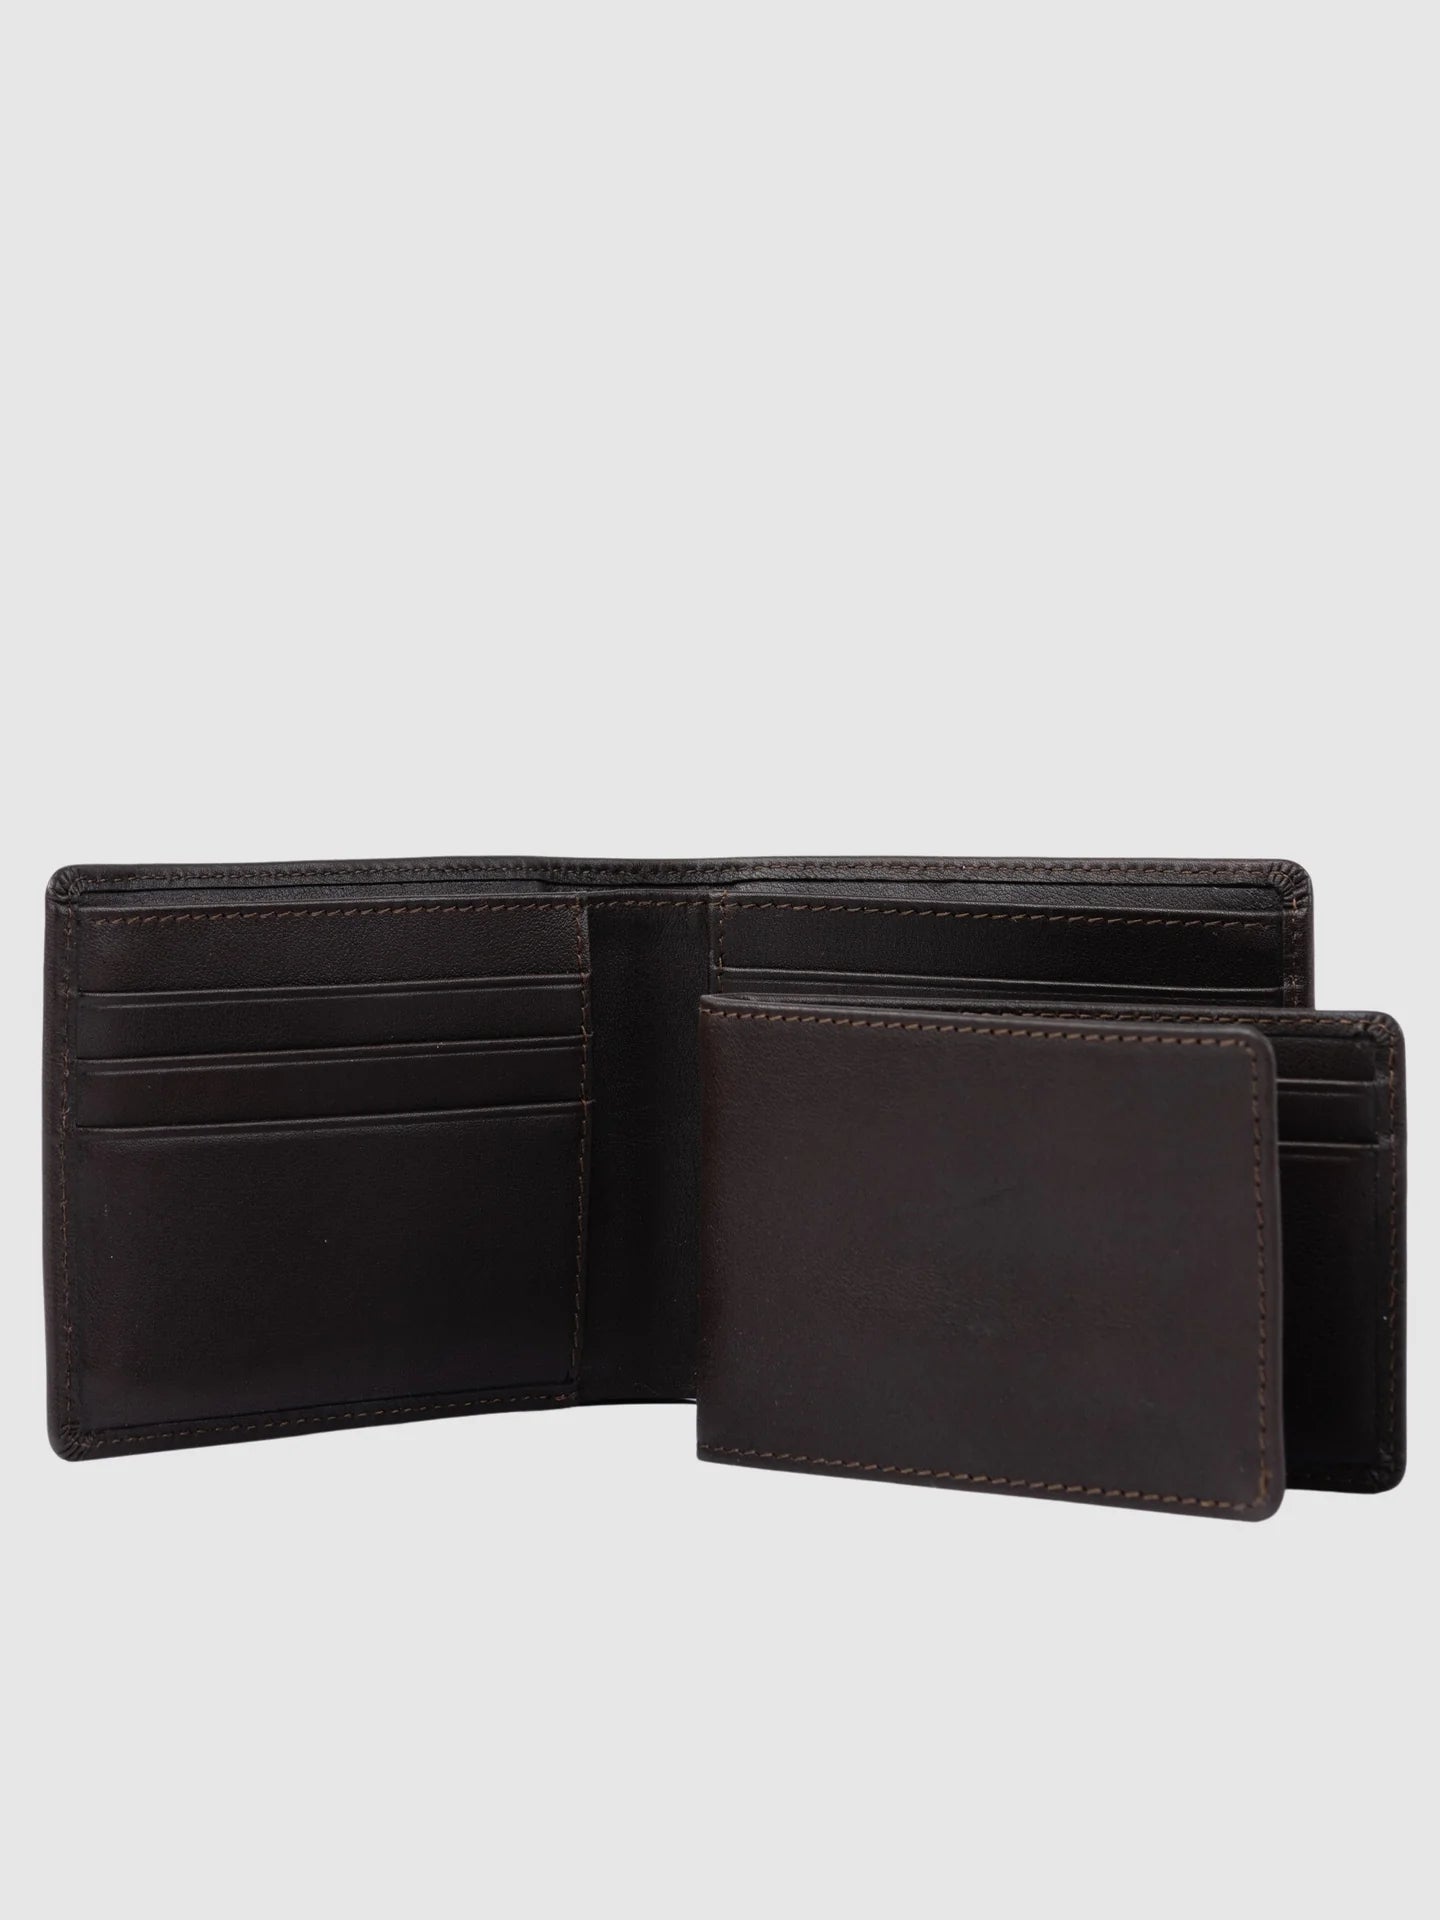 Rusty High River 2 Leather Wallet - Dark Coffee